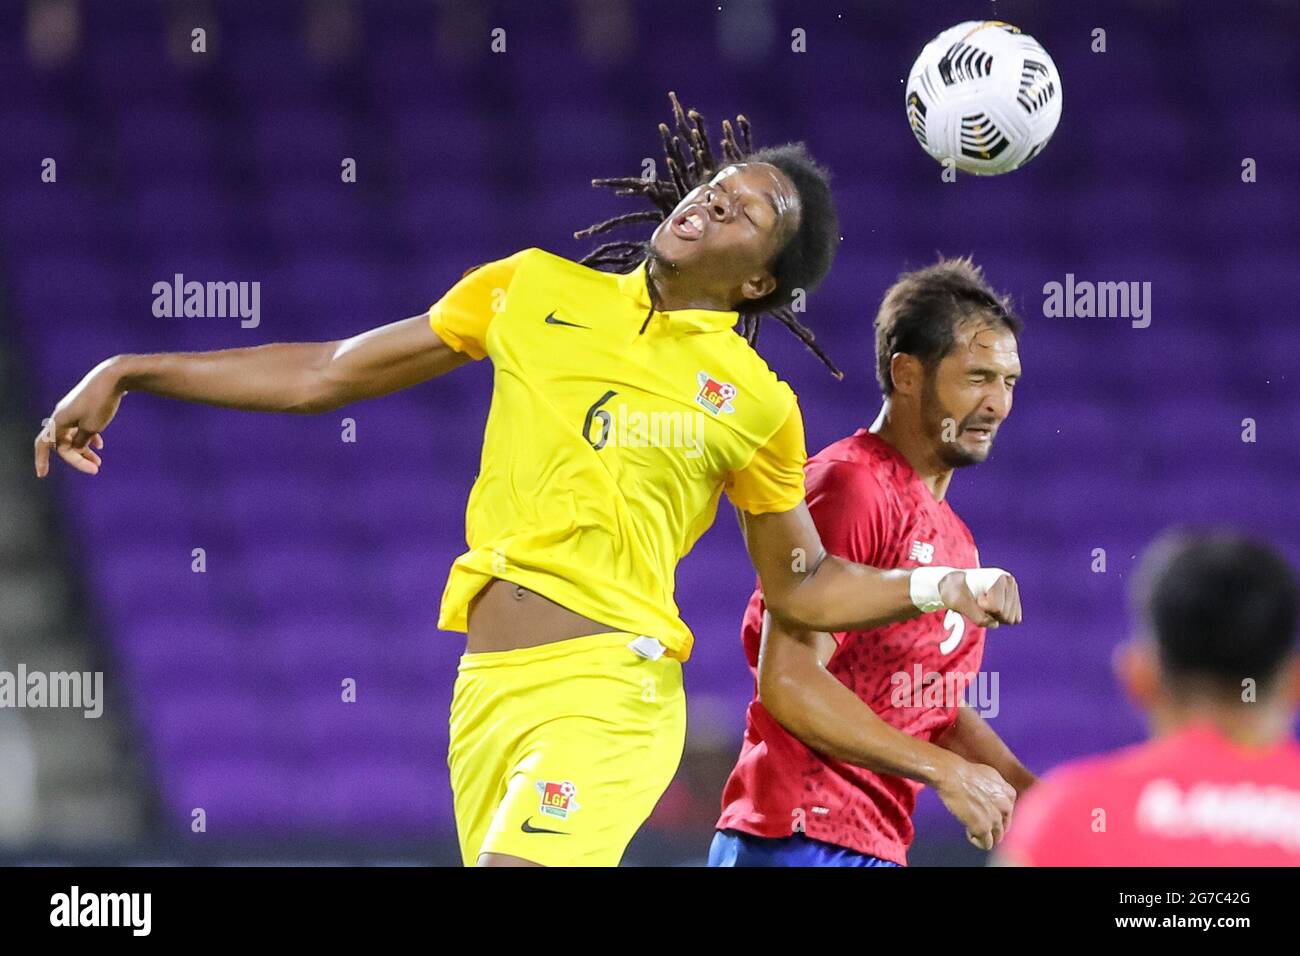 Orlando, Florida, USA. July 12, 2021: Guadeloupe midfielder QUENTIN ANNETTE (6) gets a header against Costa Rica midfielder CELSO BORGES (5) during the 2021 Concacaf Gold Cup Costa Rica vs Guadeloupe soccer match at Exploria Stadium in Orlando, Fl on July 12, 2021. Credit: Cory Knowlton/ZUMA Wire/Alamy Live News Stock Photo